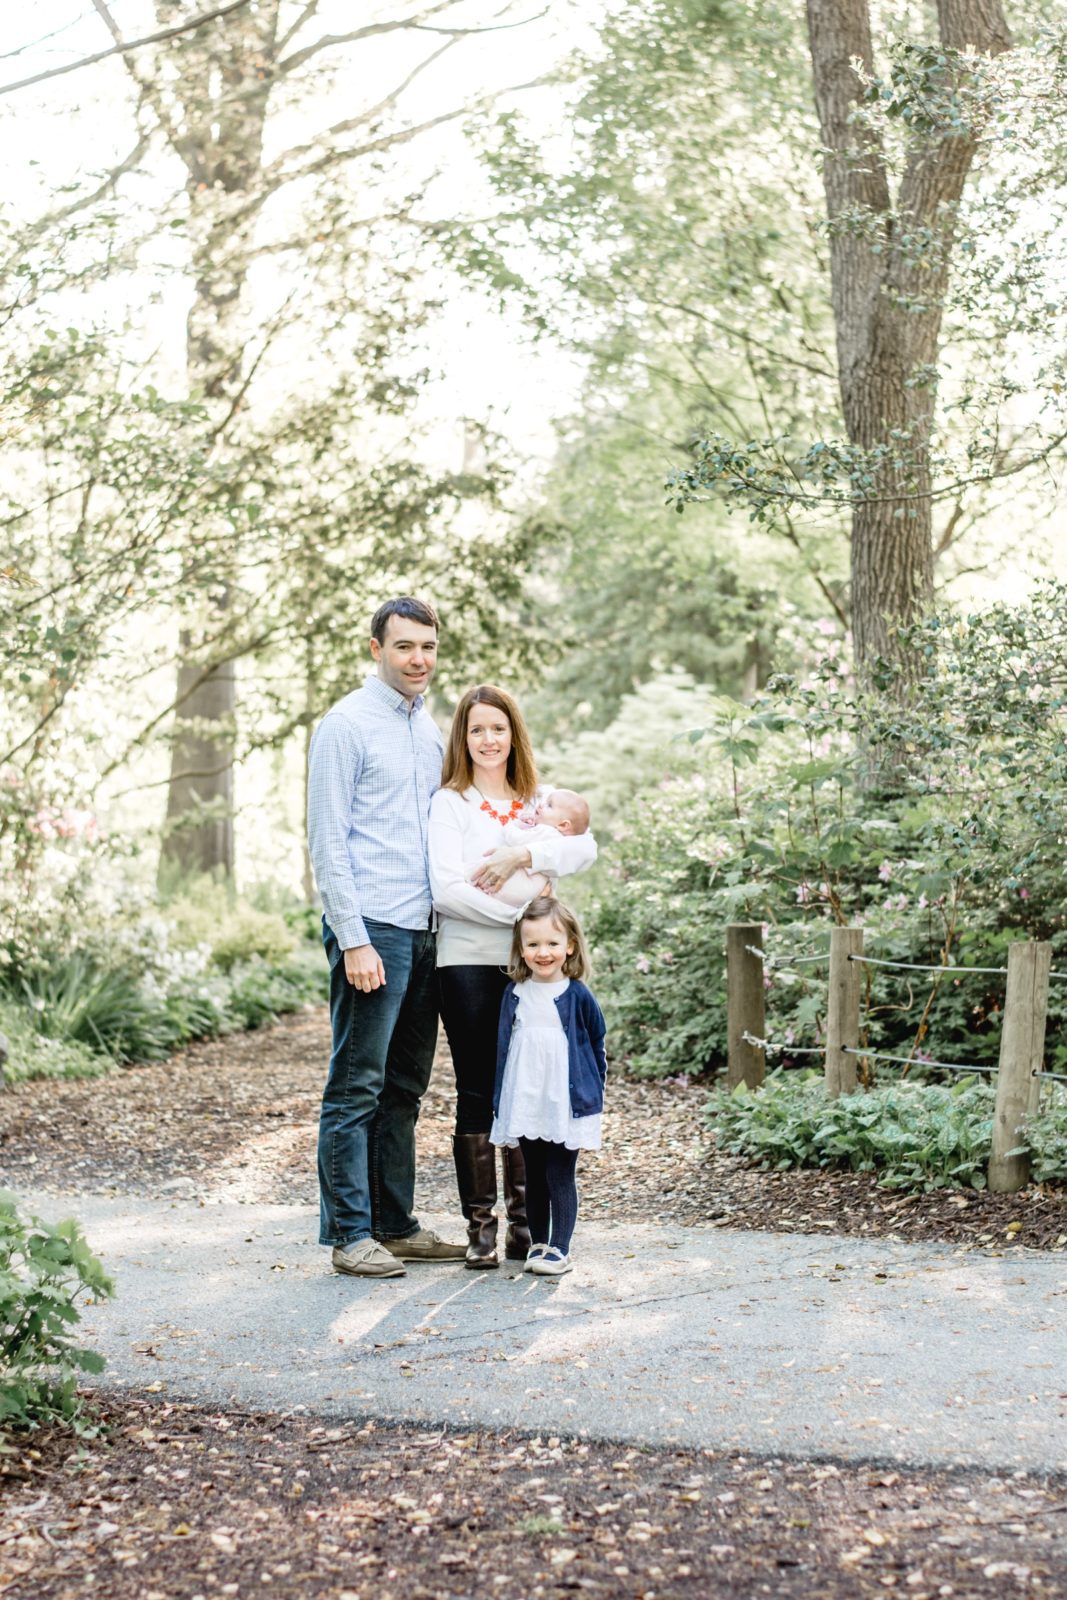 The Byrne Family at Brookside Gardens | jentilleyphotography.com